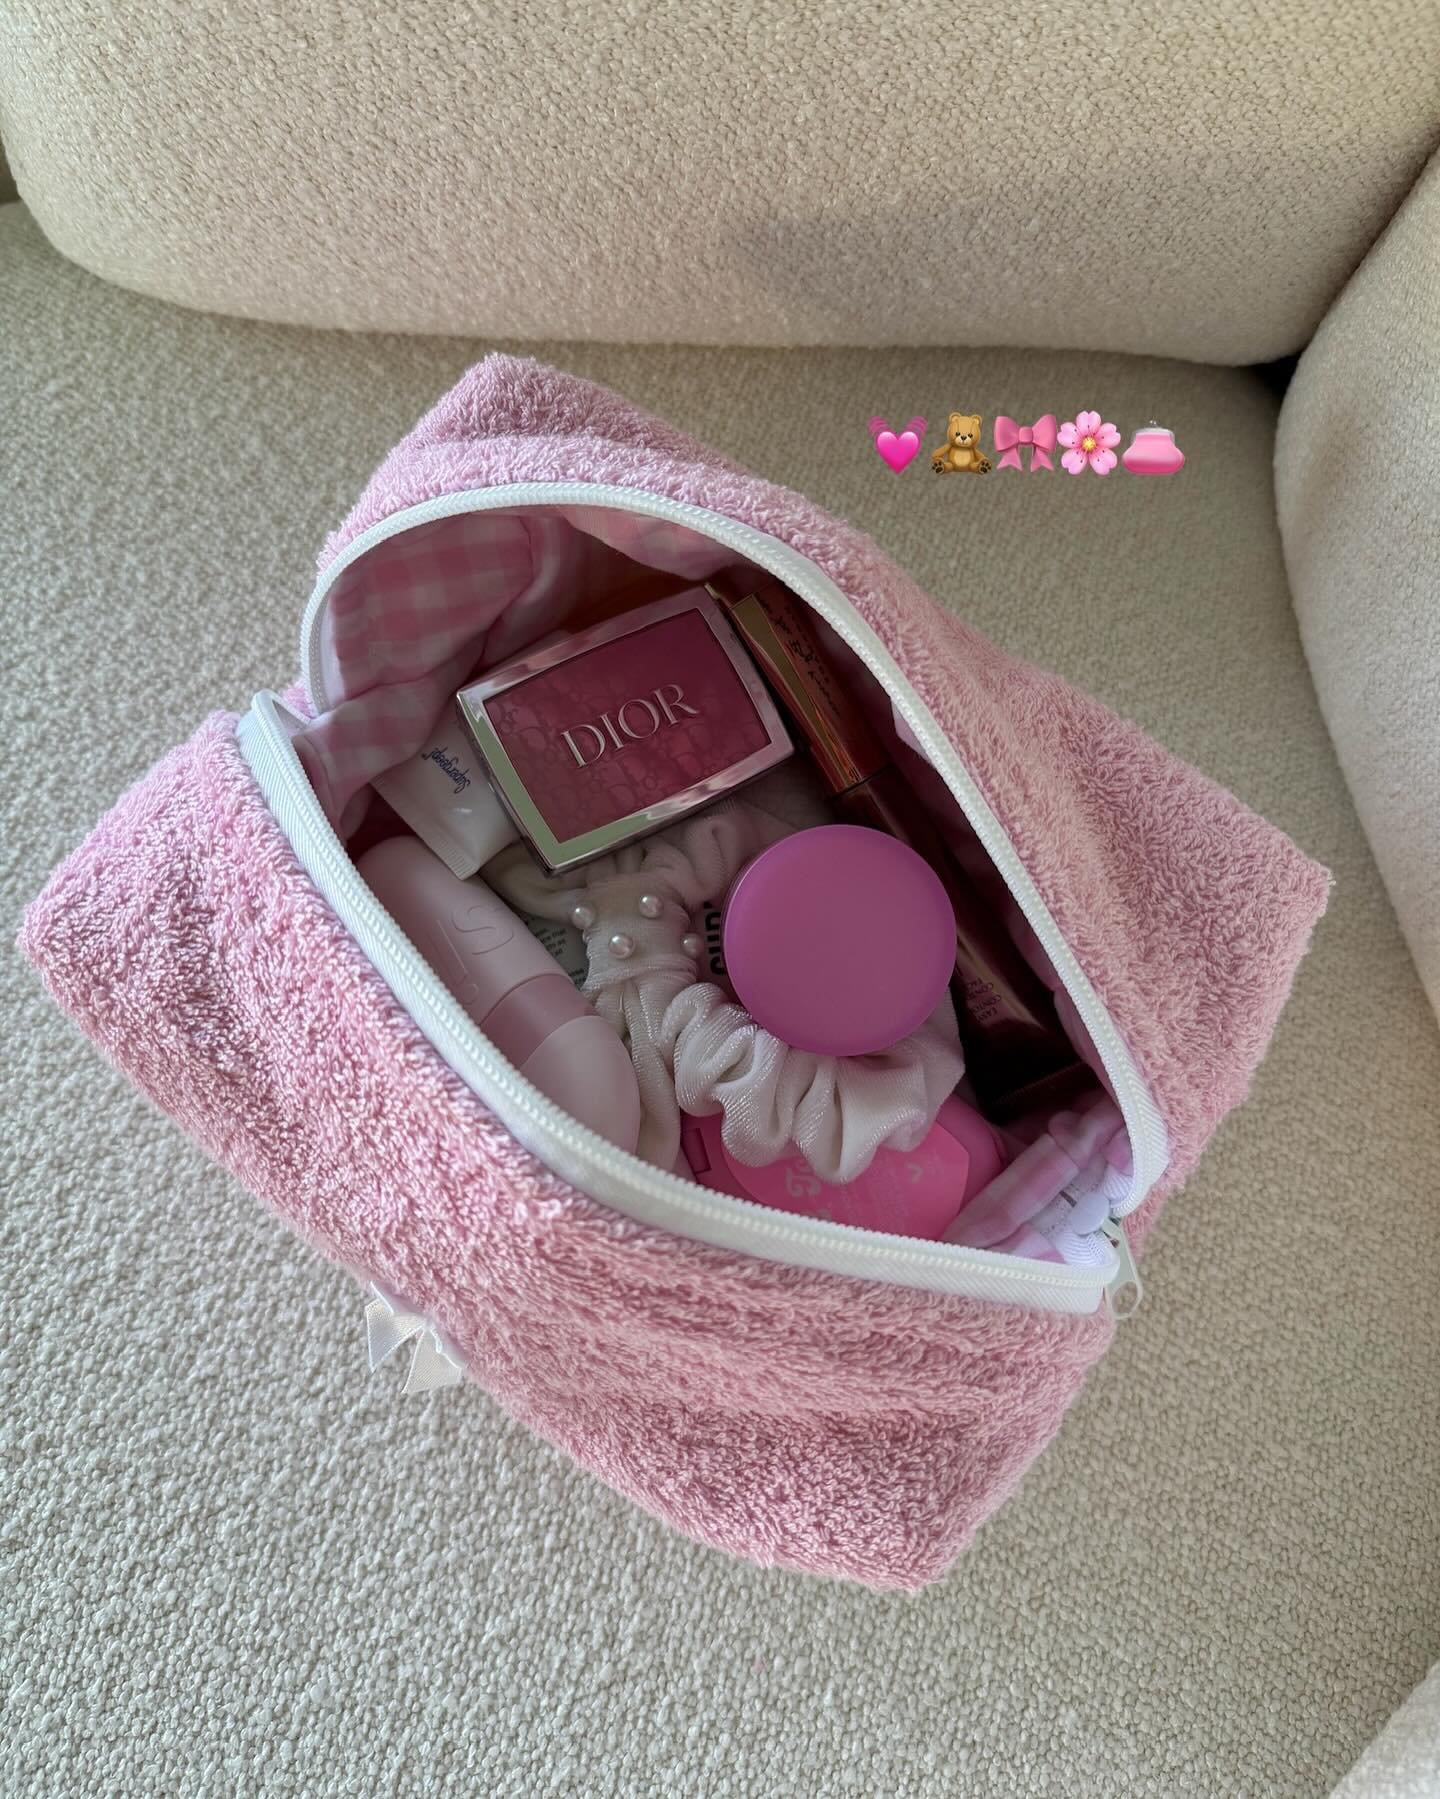 Pretty Beauty Bag in Pink Terry🧸🩷🎀 Perfect for holding your favorite makeup, hair care and skincare products. Coming in 3 sizes soon. Small, Medium &amp; Large💓

#handmade #beautybags #makeupbags #beautystorage #smallbusinesslove #makeuppouches #